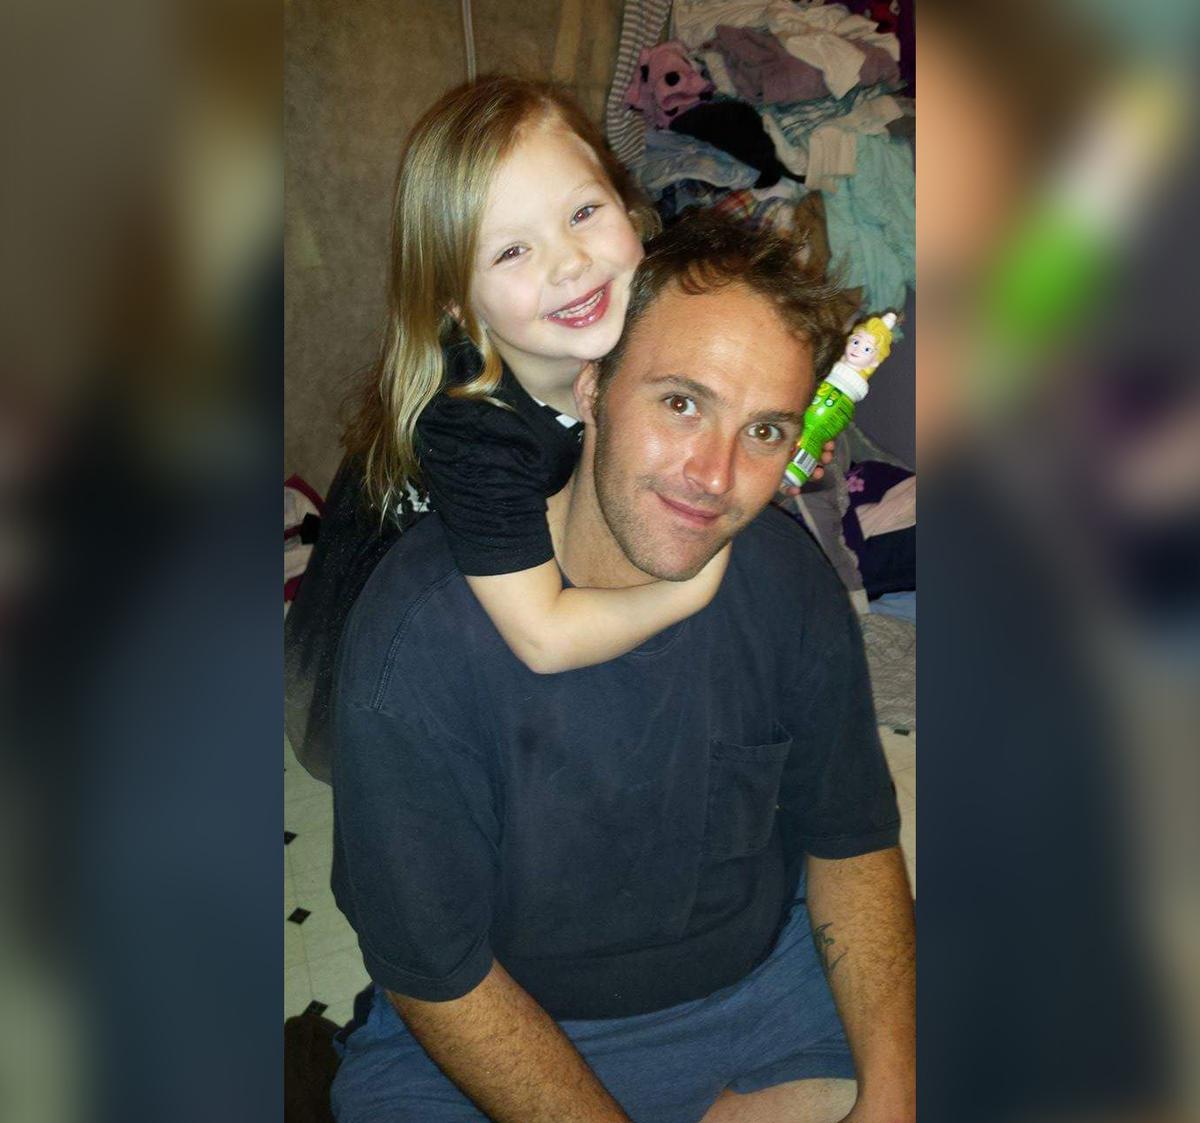 Kaylei Miller with her father, Jason (Courtesy of <a href="https://www.facebook.com/whitney.brown.18400">Whitney Barton</a>)